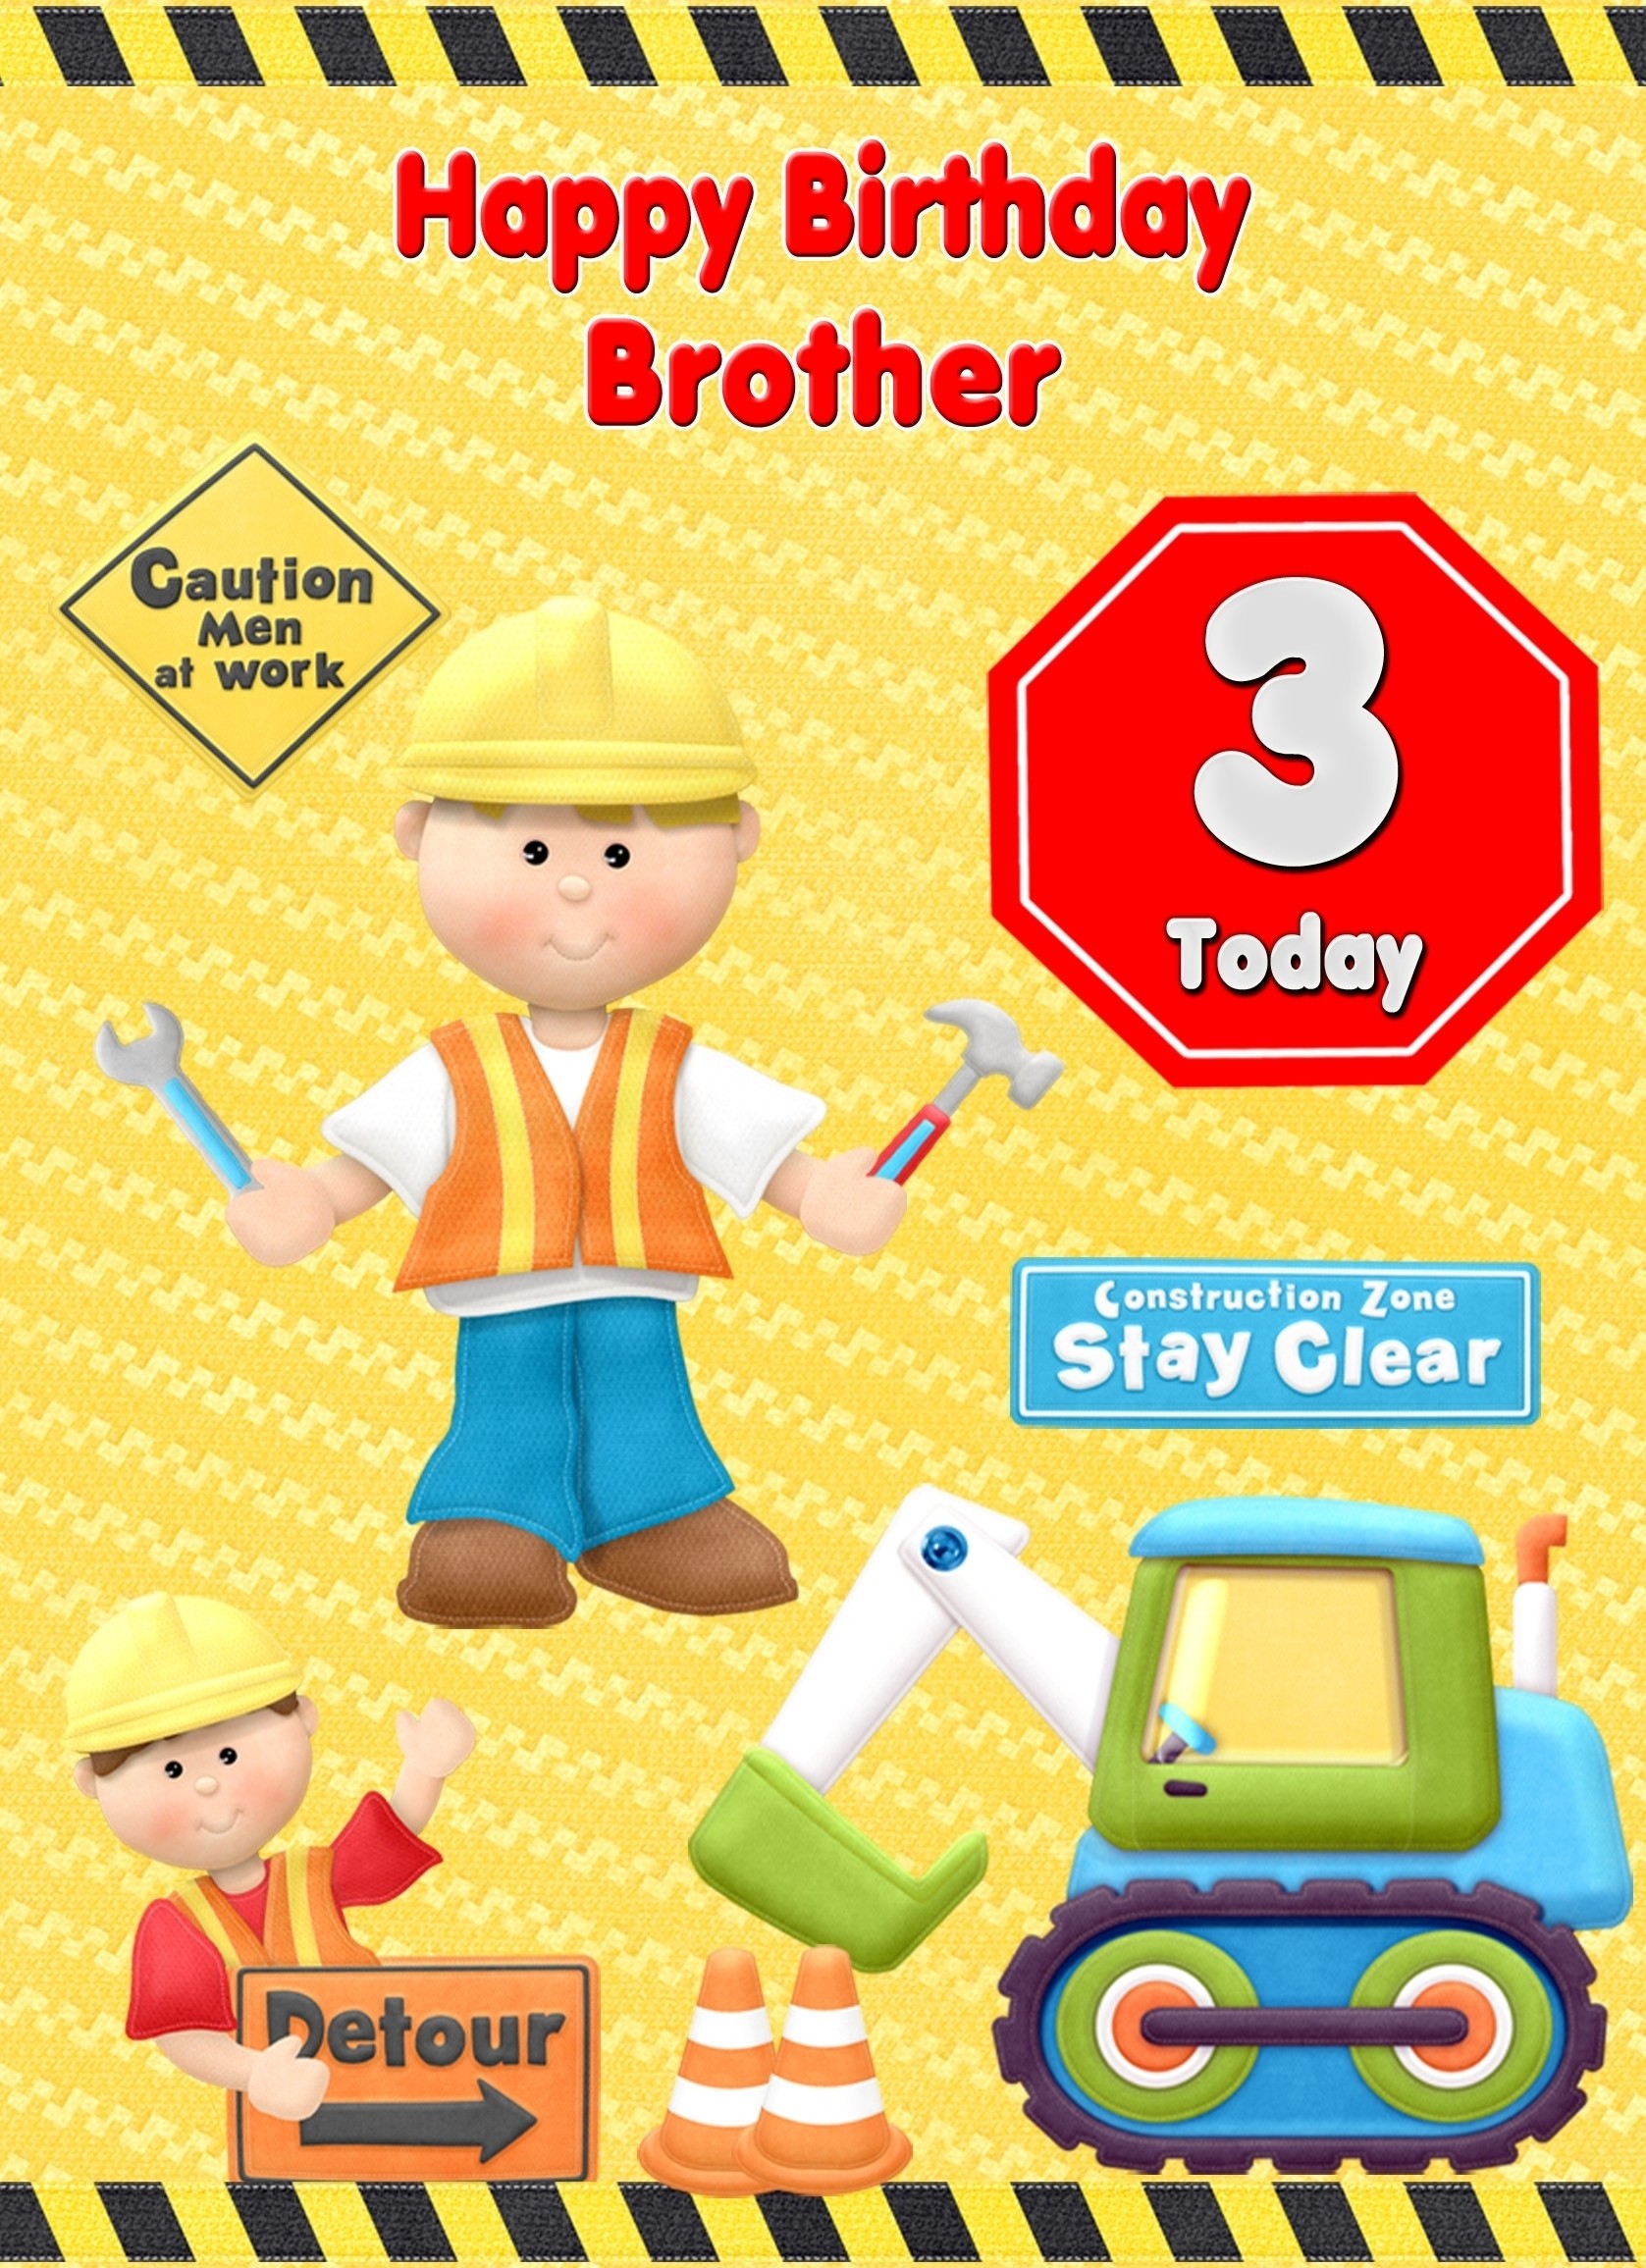 Kids 3rd Birthday Builder Cartoon Card for Brother